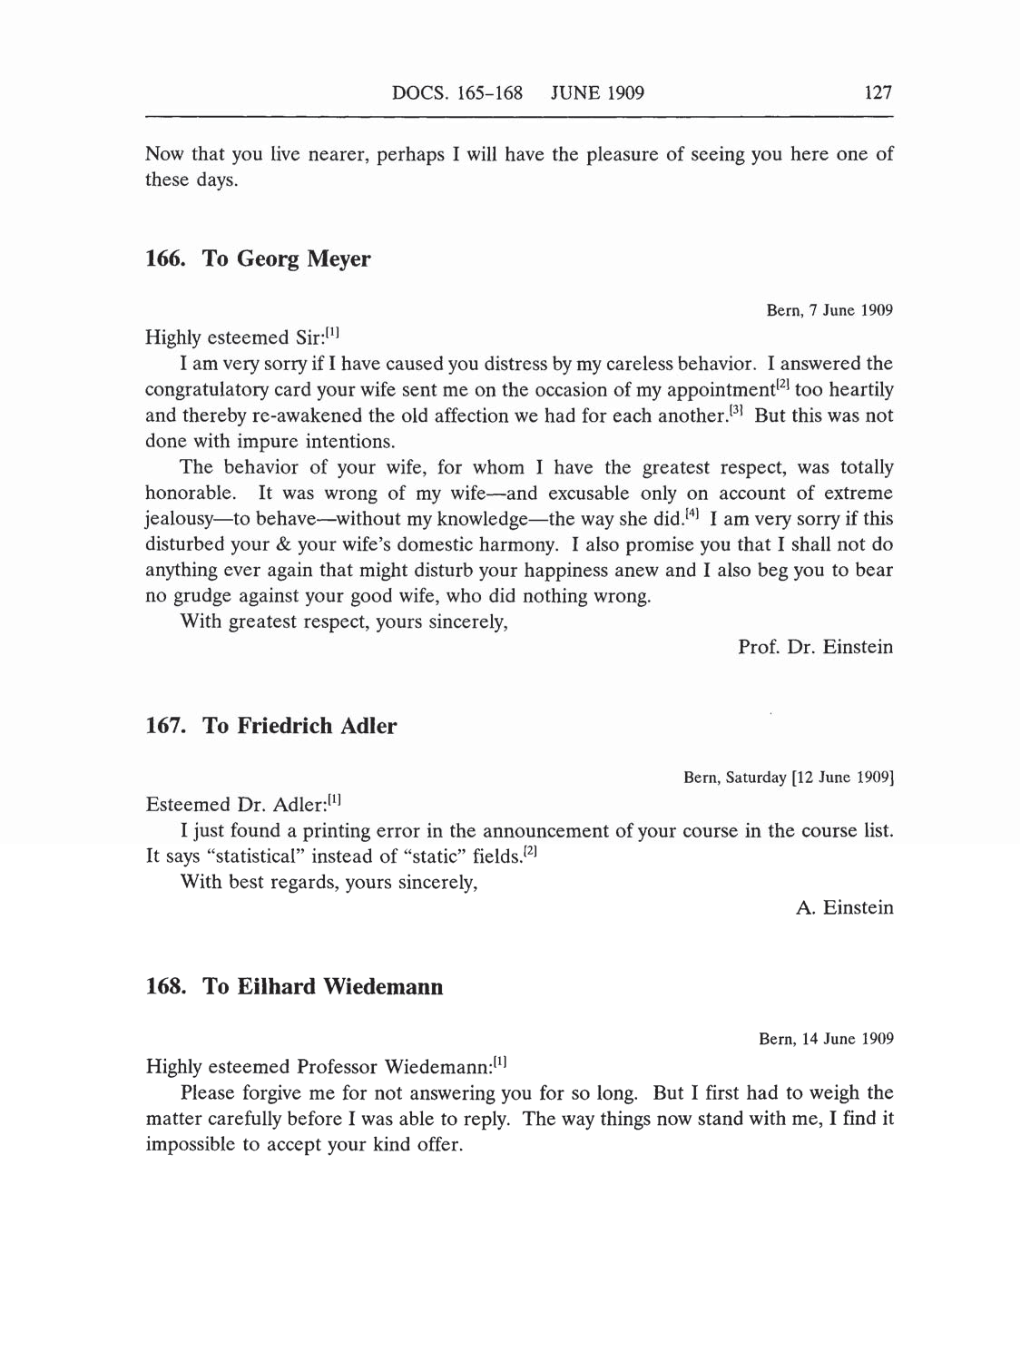 Volume 5: The Swiss Years: Correspondence, 1902-1914 (English translation supplement) page 127